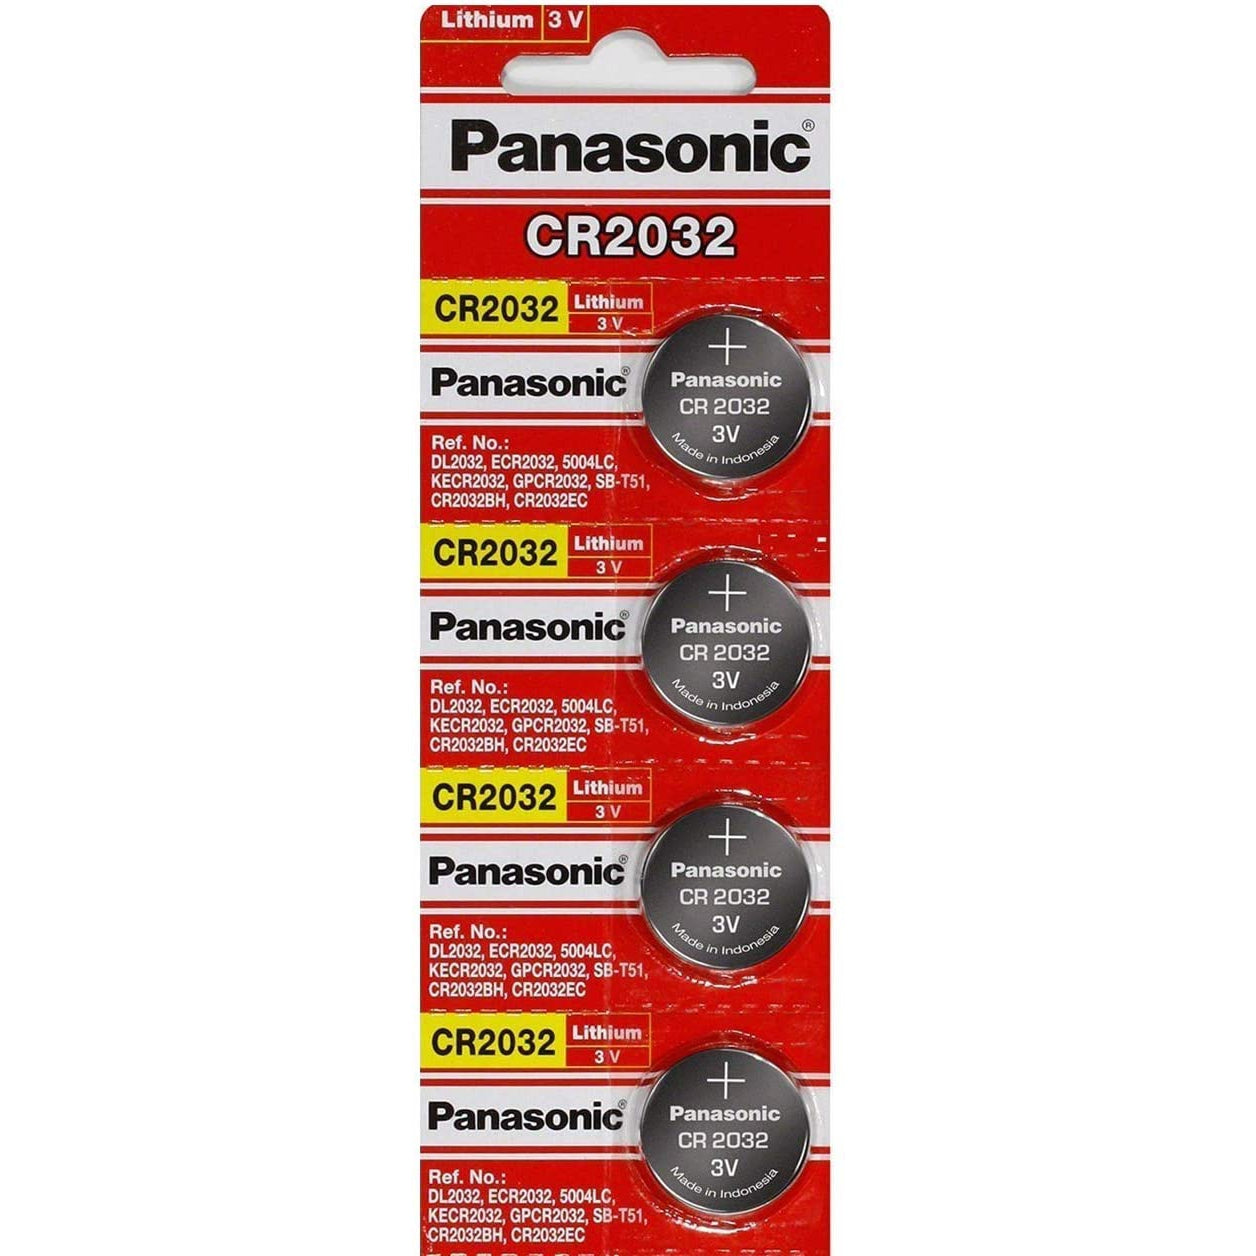 Panasonic CR-2032 Lithium Coin Battery - Four Pack